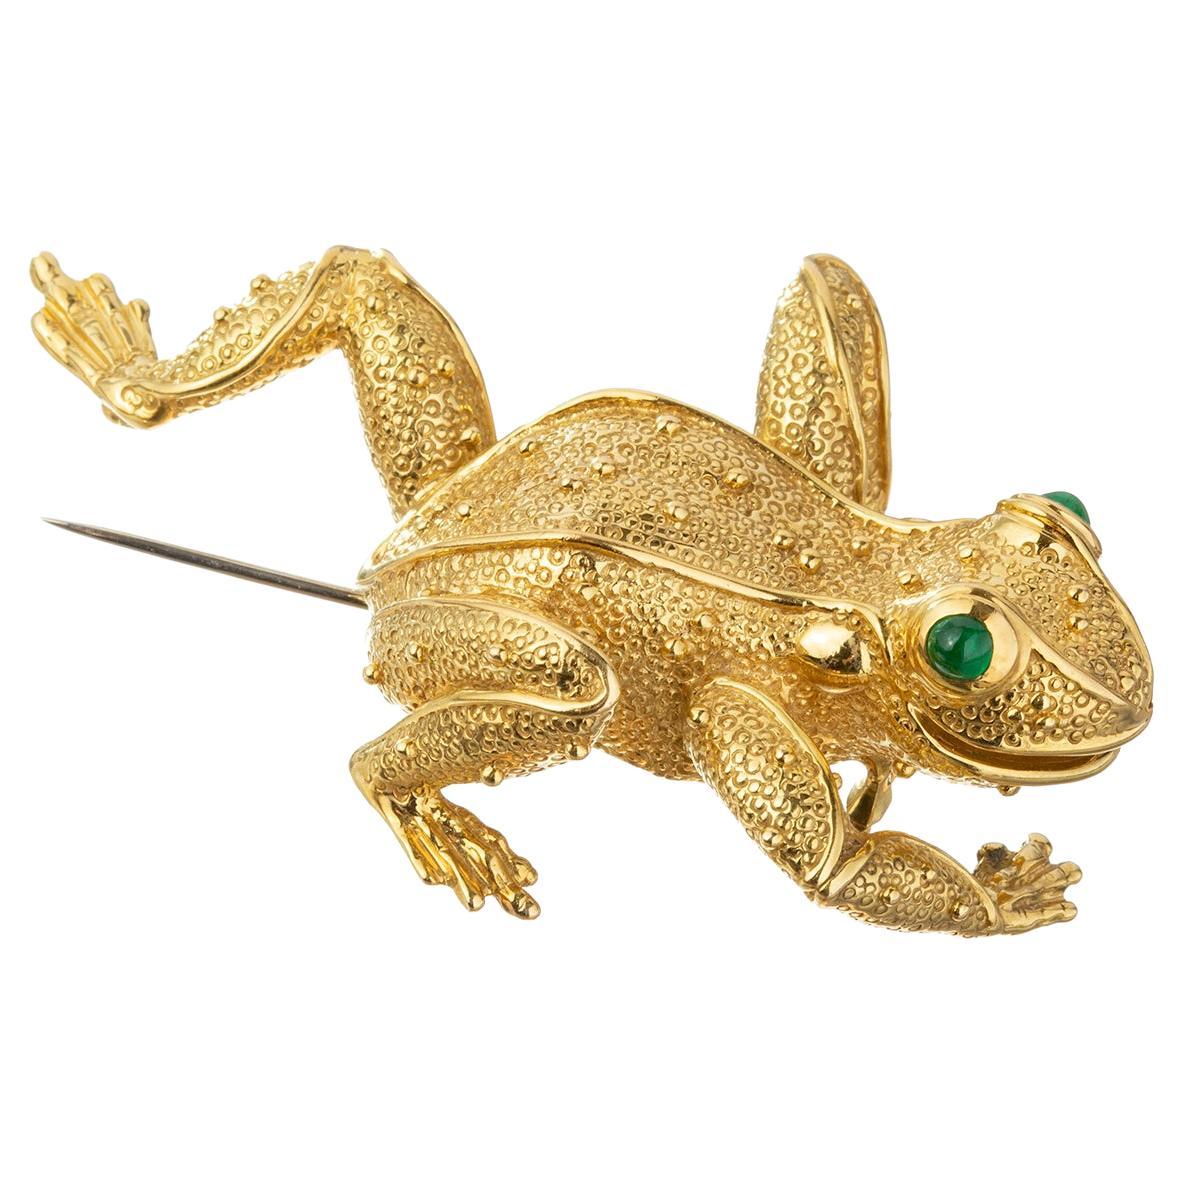 Whimsical leaping frog in textured and polished 18k yellow gold.  Eyes are accented by vibrant green, round faceted, natural emerald eyes.  White gold double pin stem hinged backing.  Measuring 3